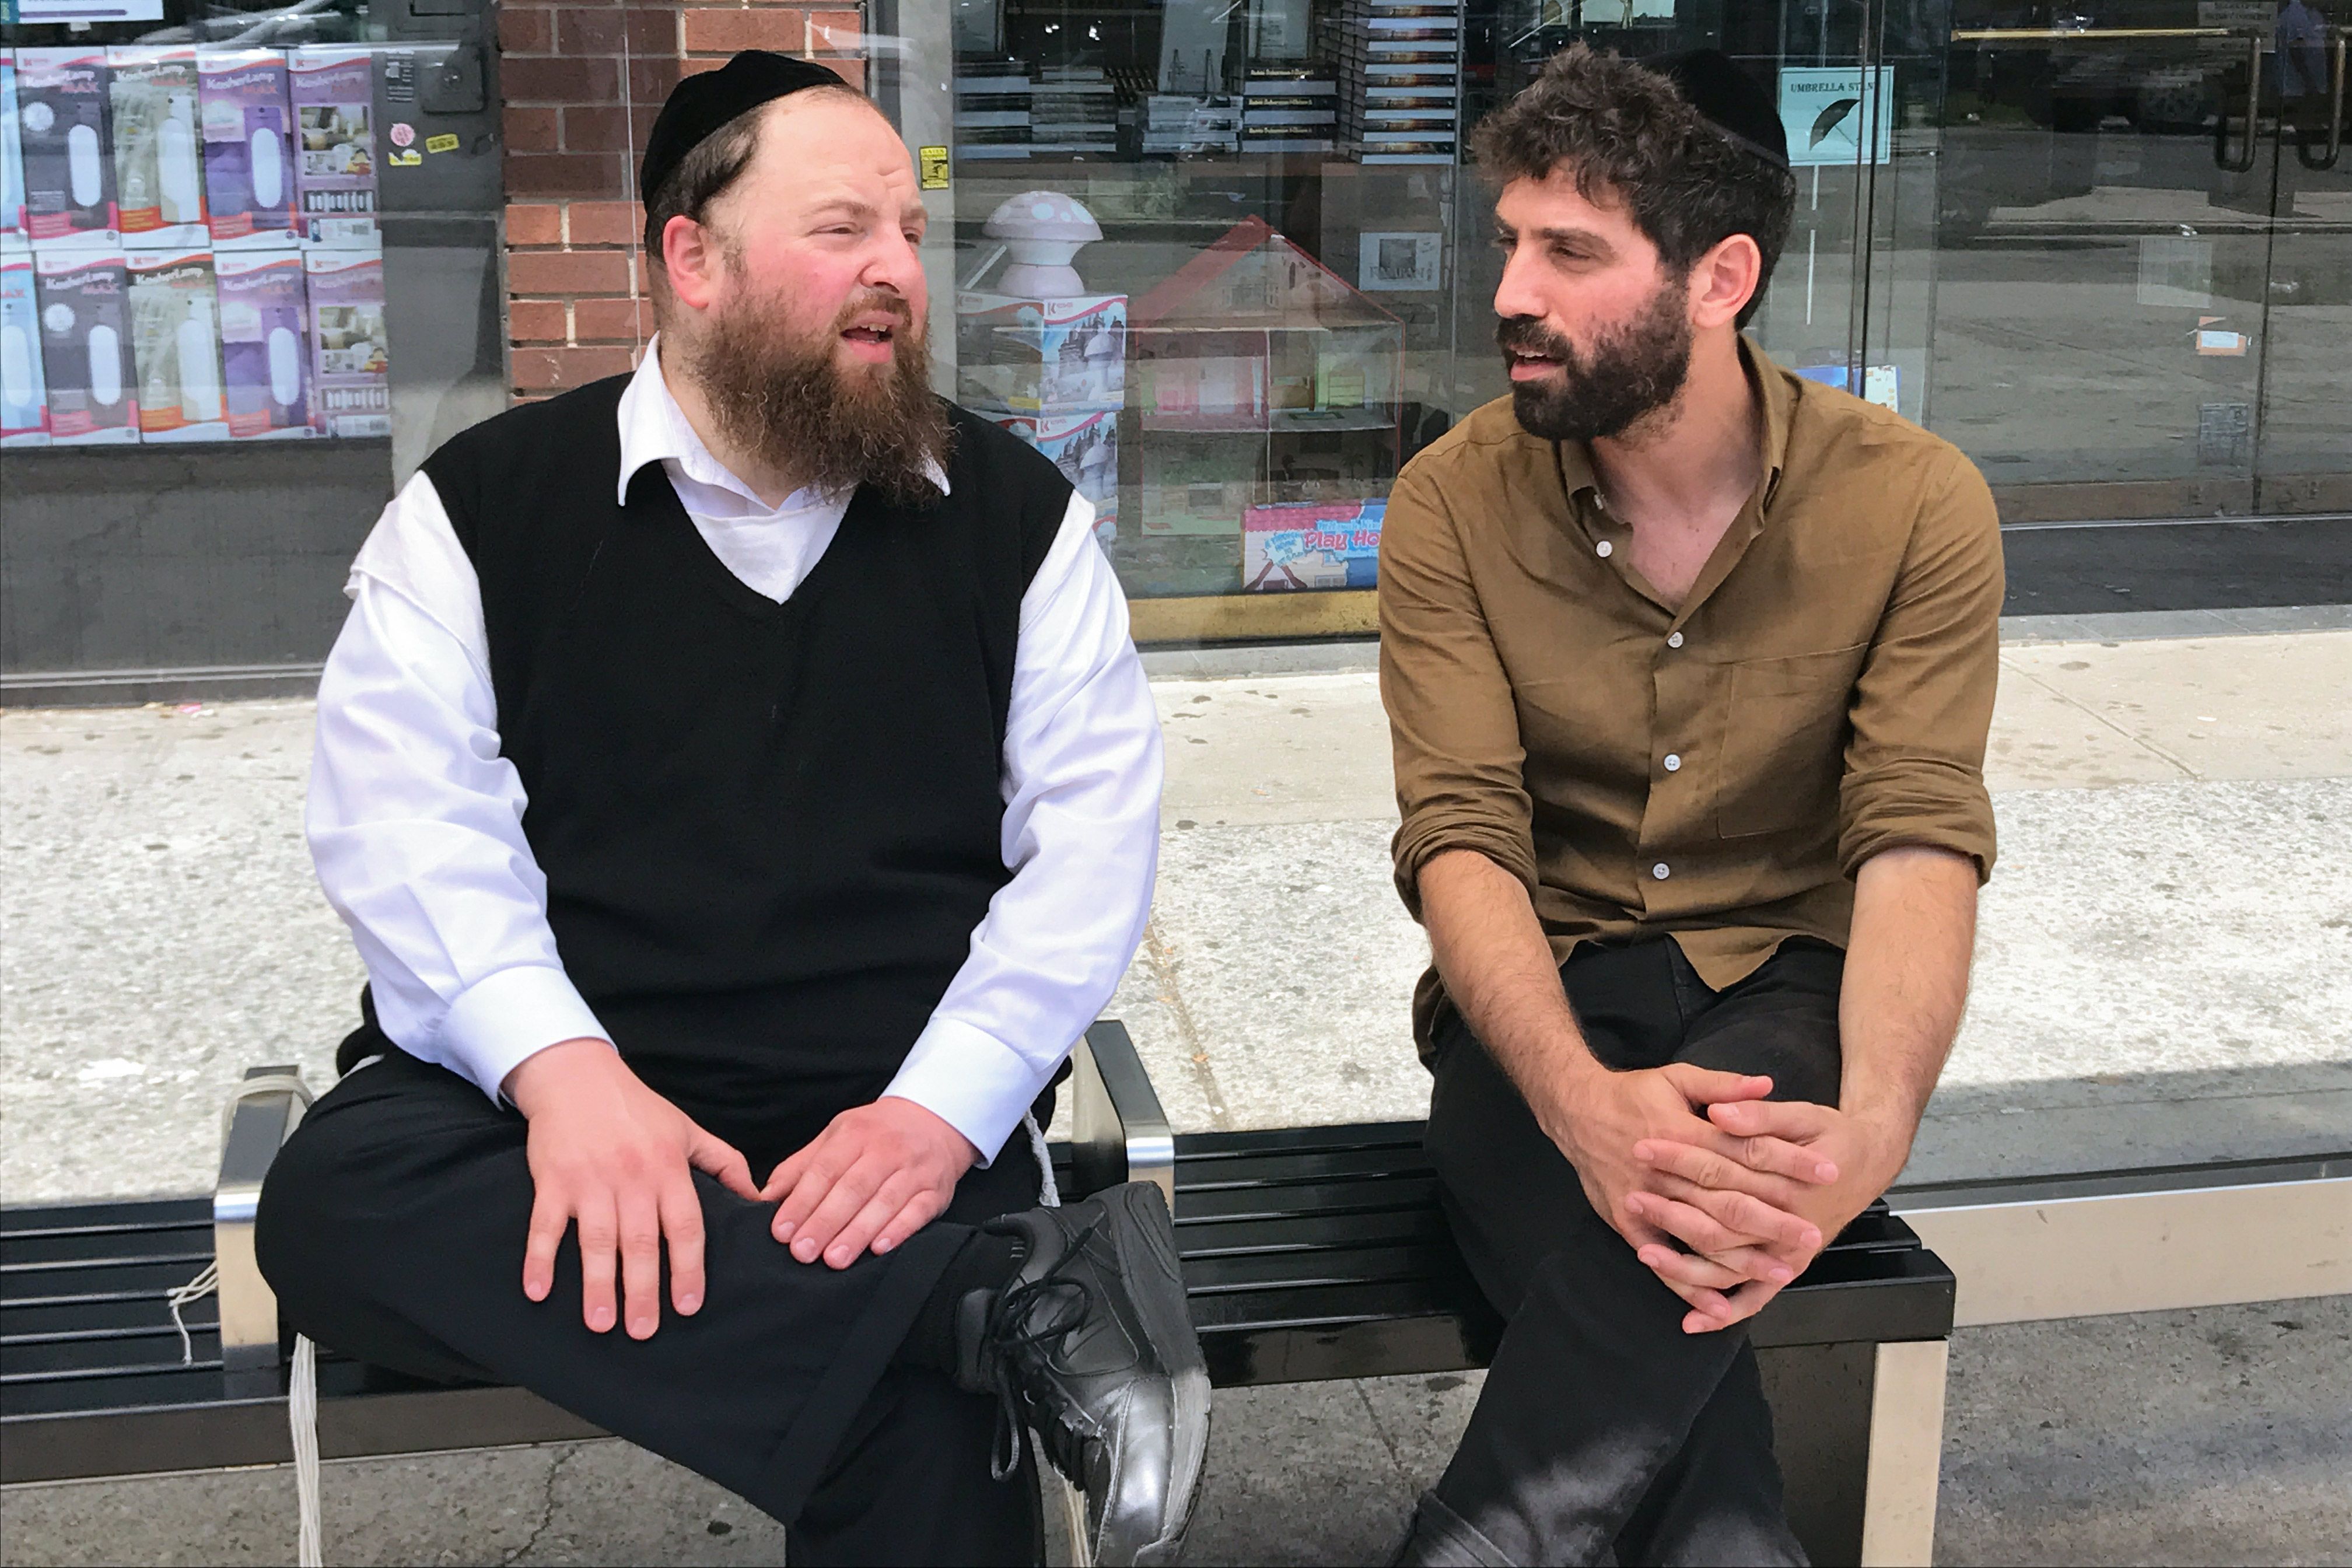 The Orthodox star of Menashe on his unorthodox rise to fame.